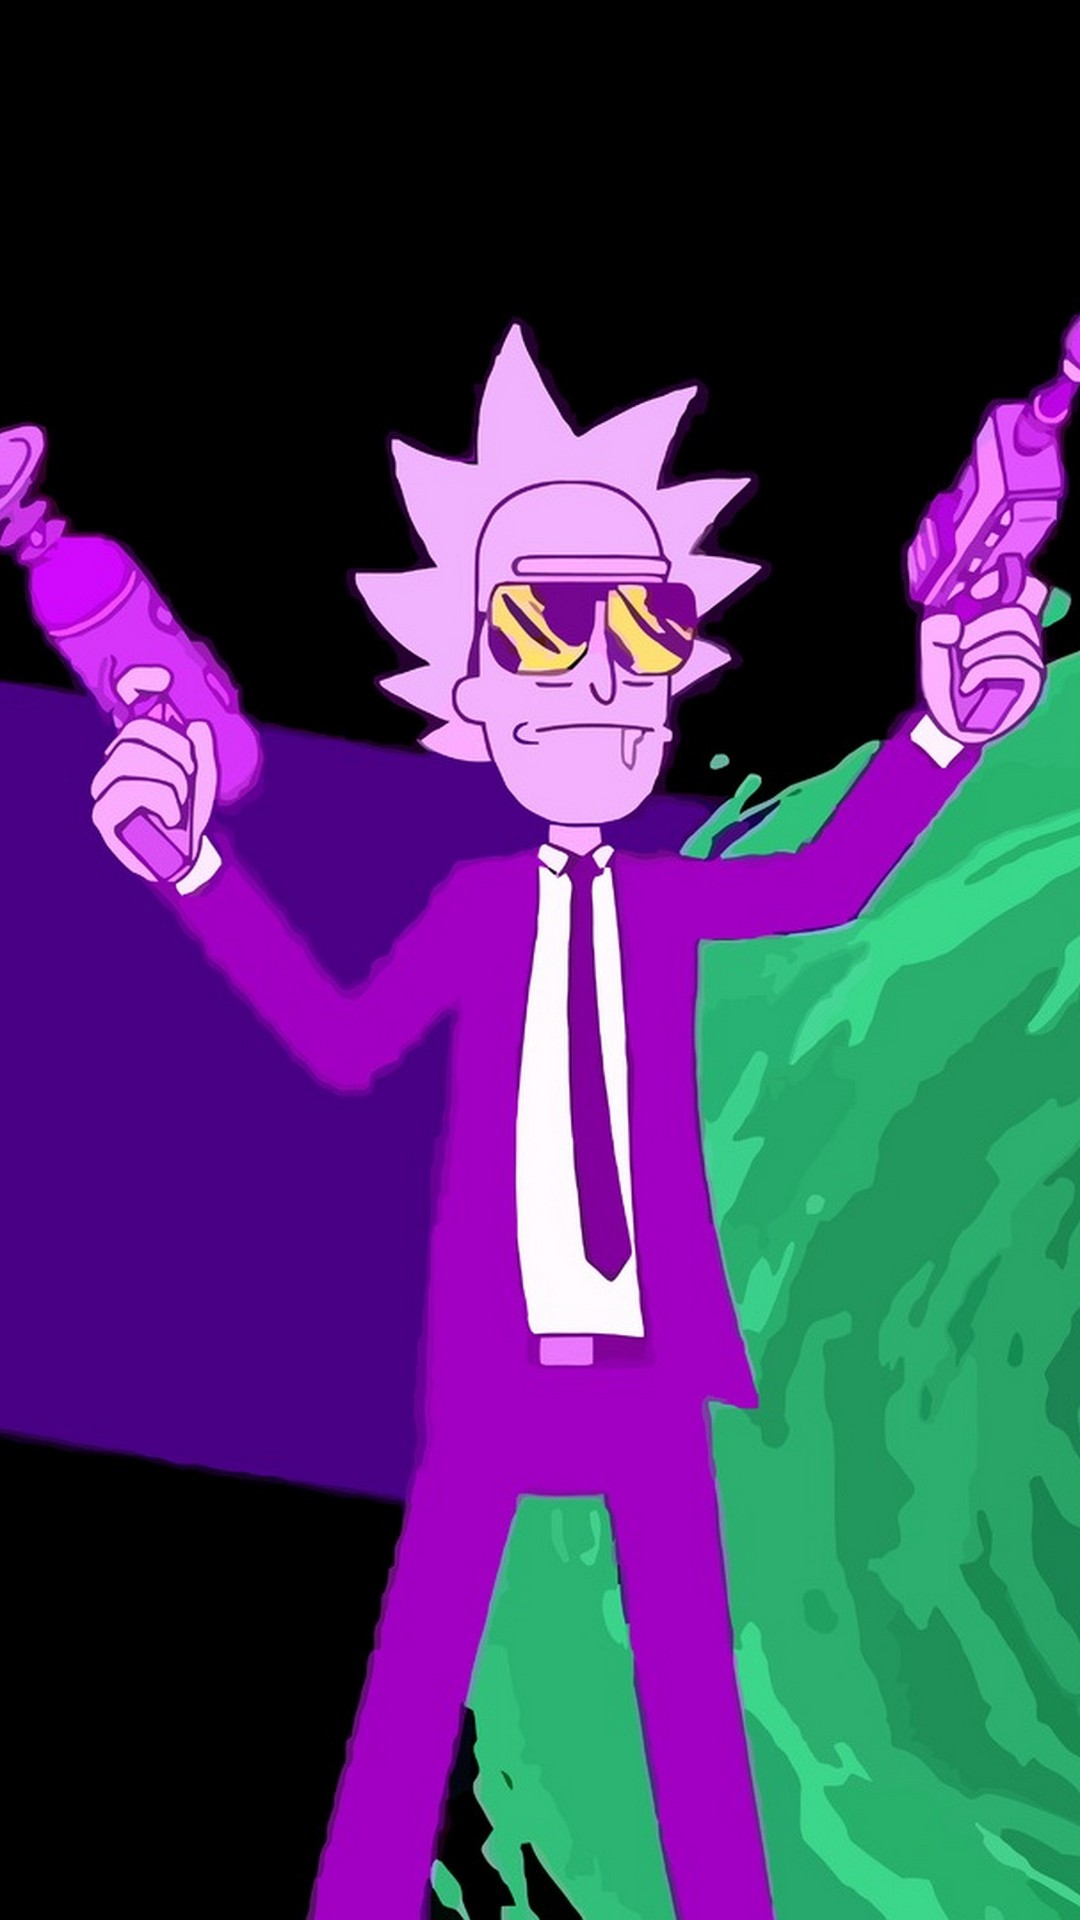 rick and morty wallpaper,cartoon,violet,fictional character,animation,anime